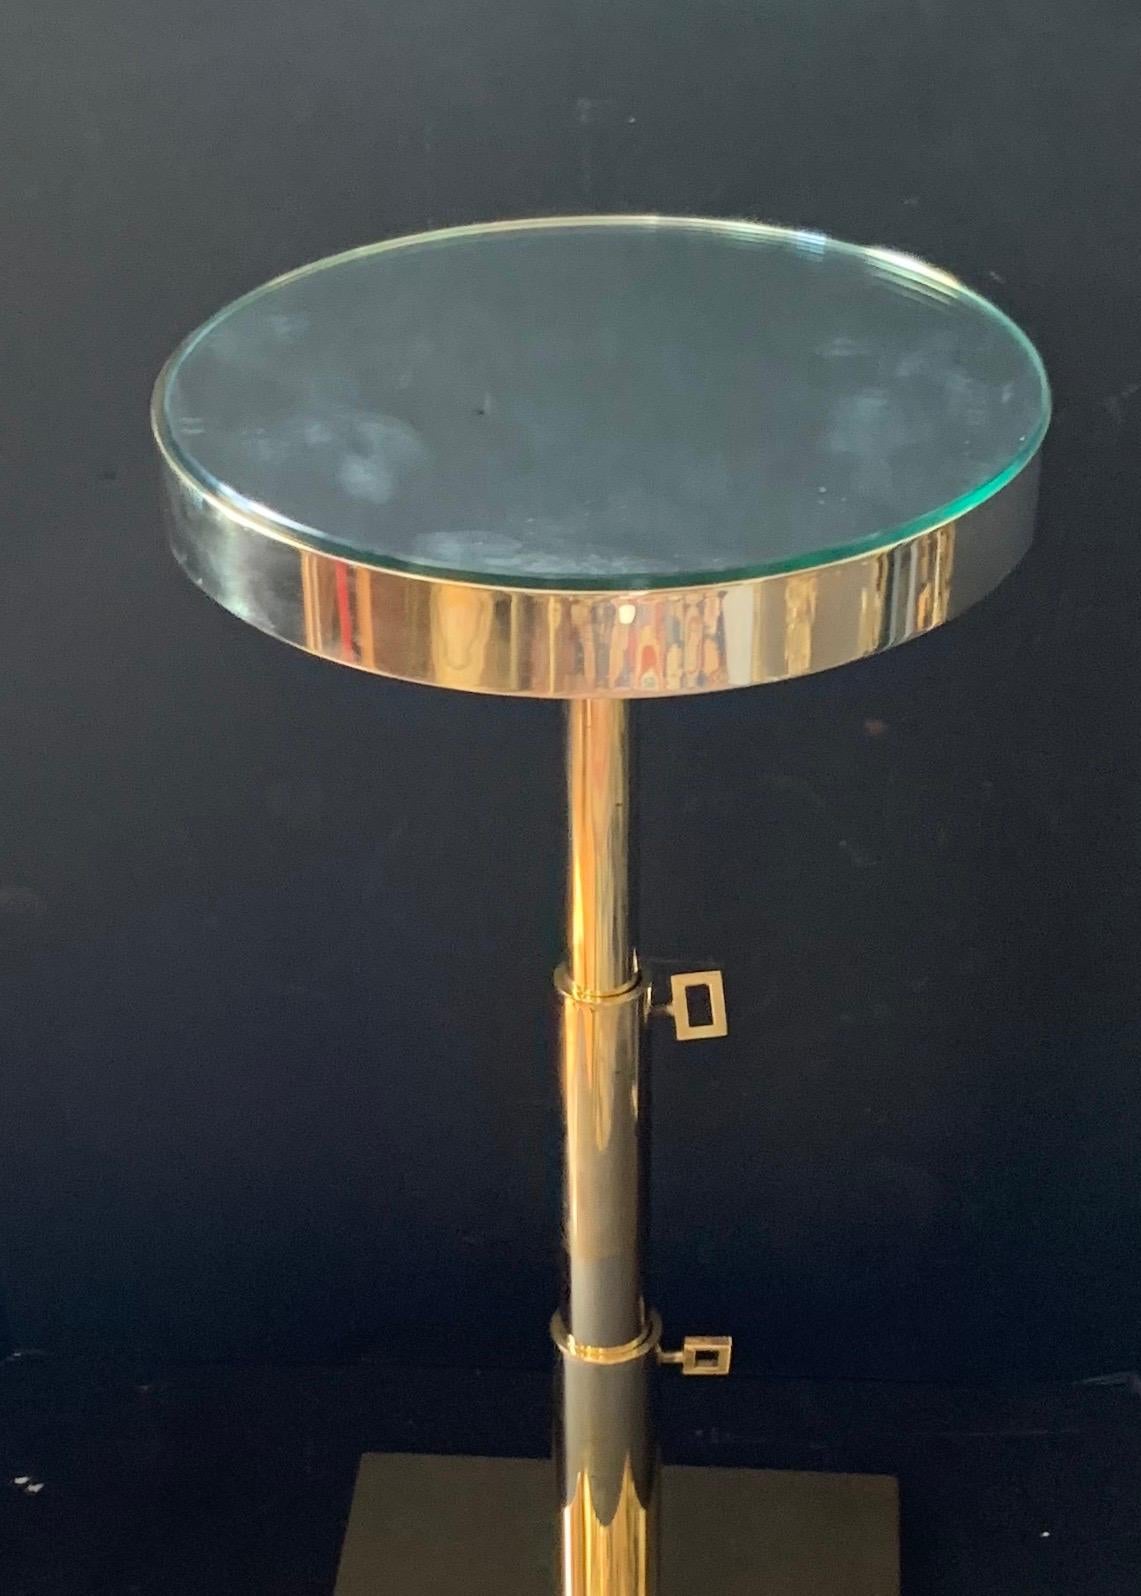 A wonderful Lorin Marsh polished bronze round mirrored top telescoping side table
Top is 12